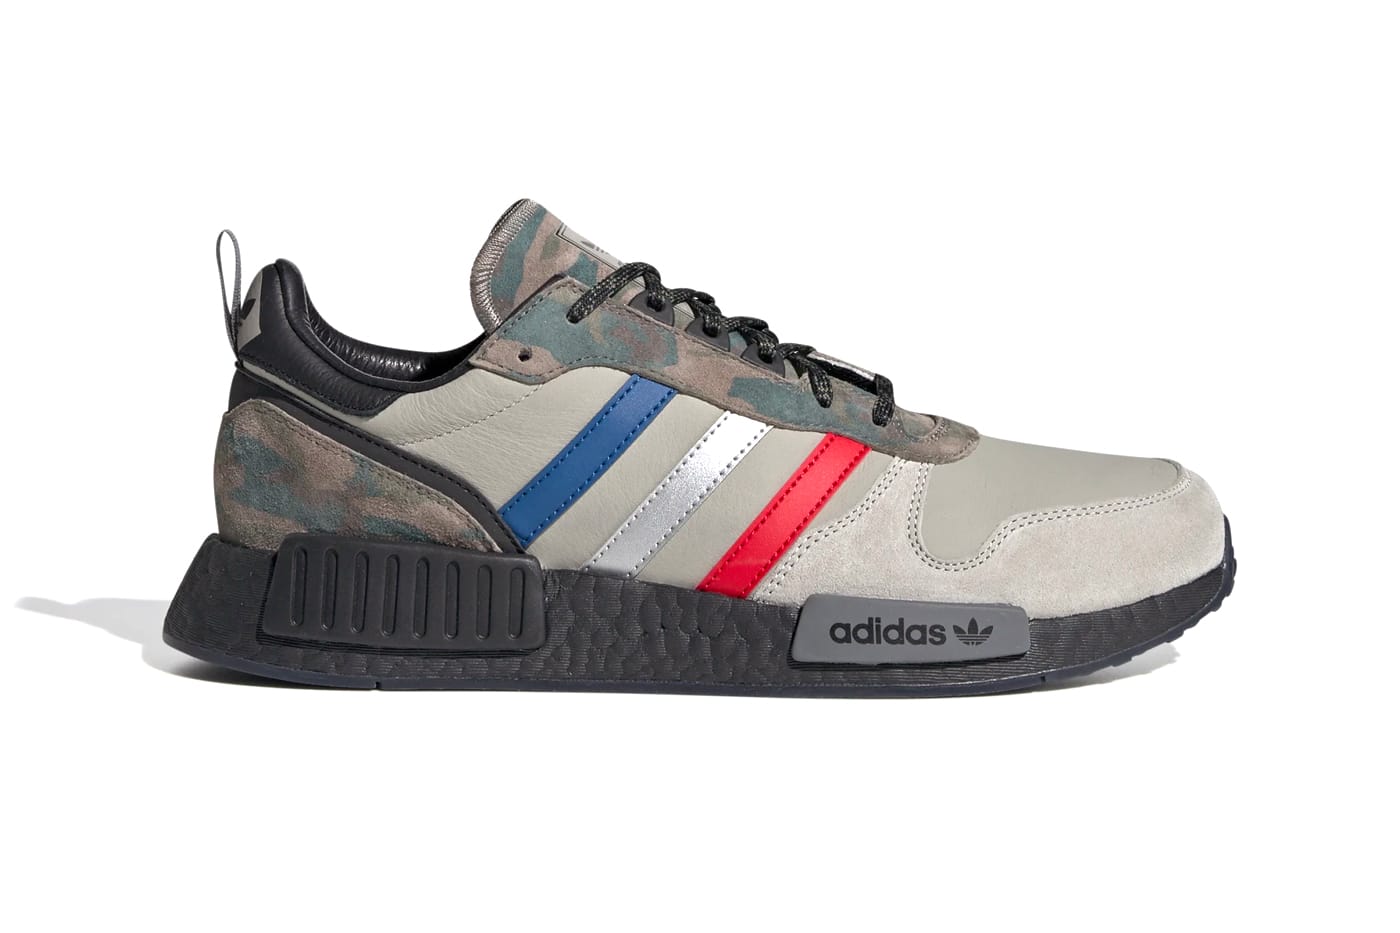 adidas Originals Blends Retro and Hybrid Designs for Three New Sneakers |  Sneakers Cartel